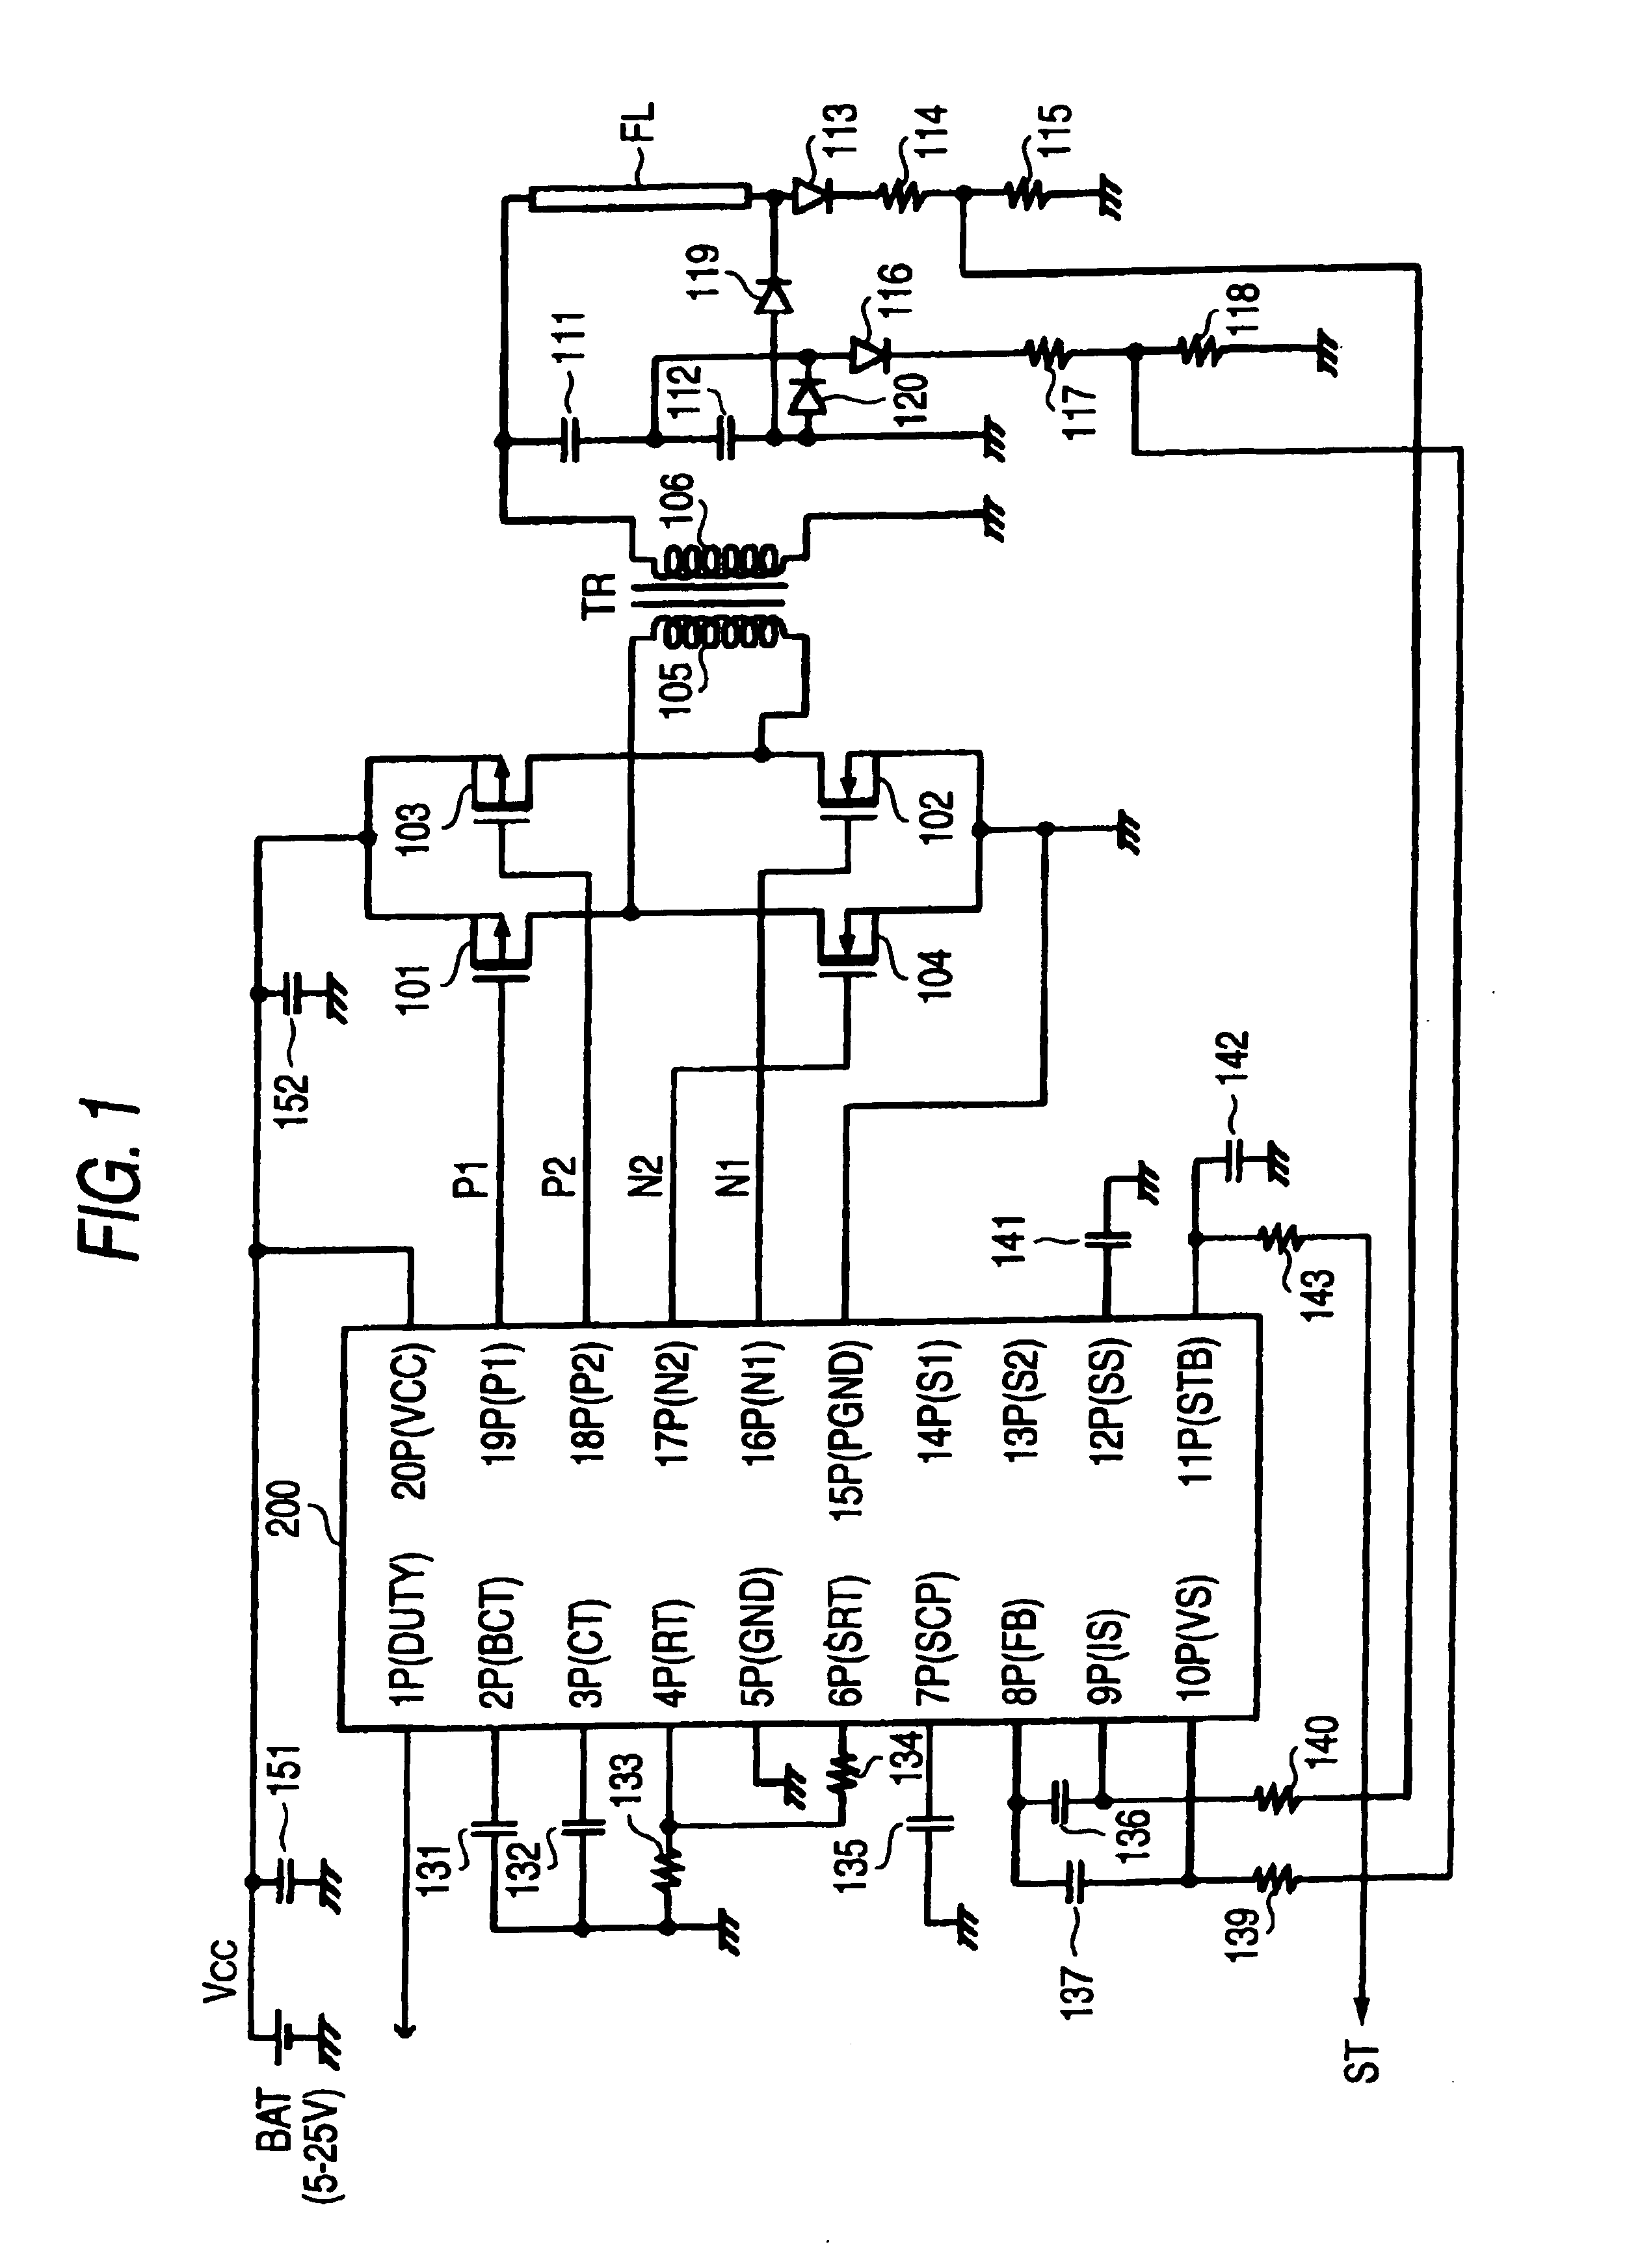 DC-AC converter and controller IC for the same